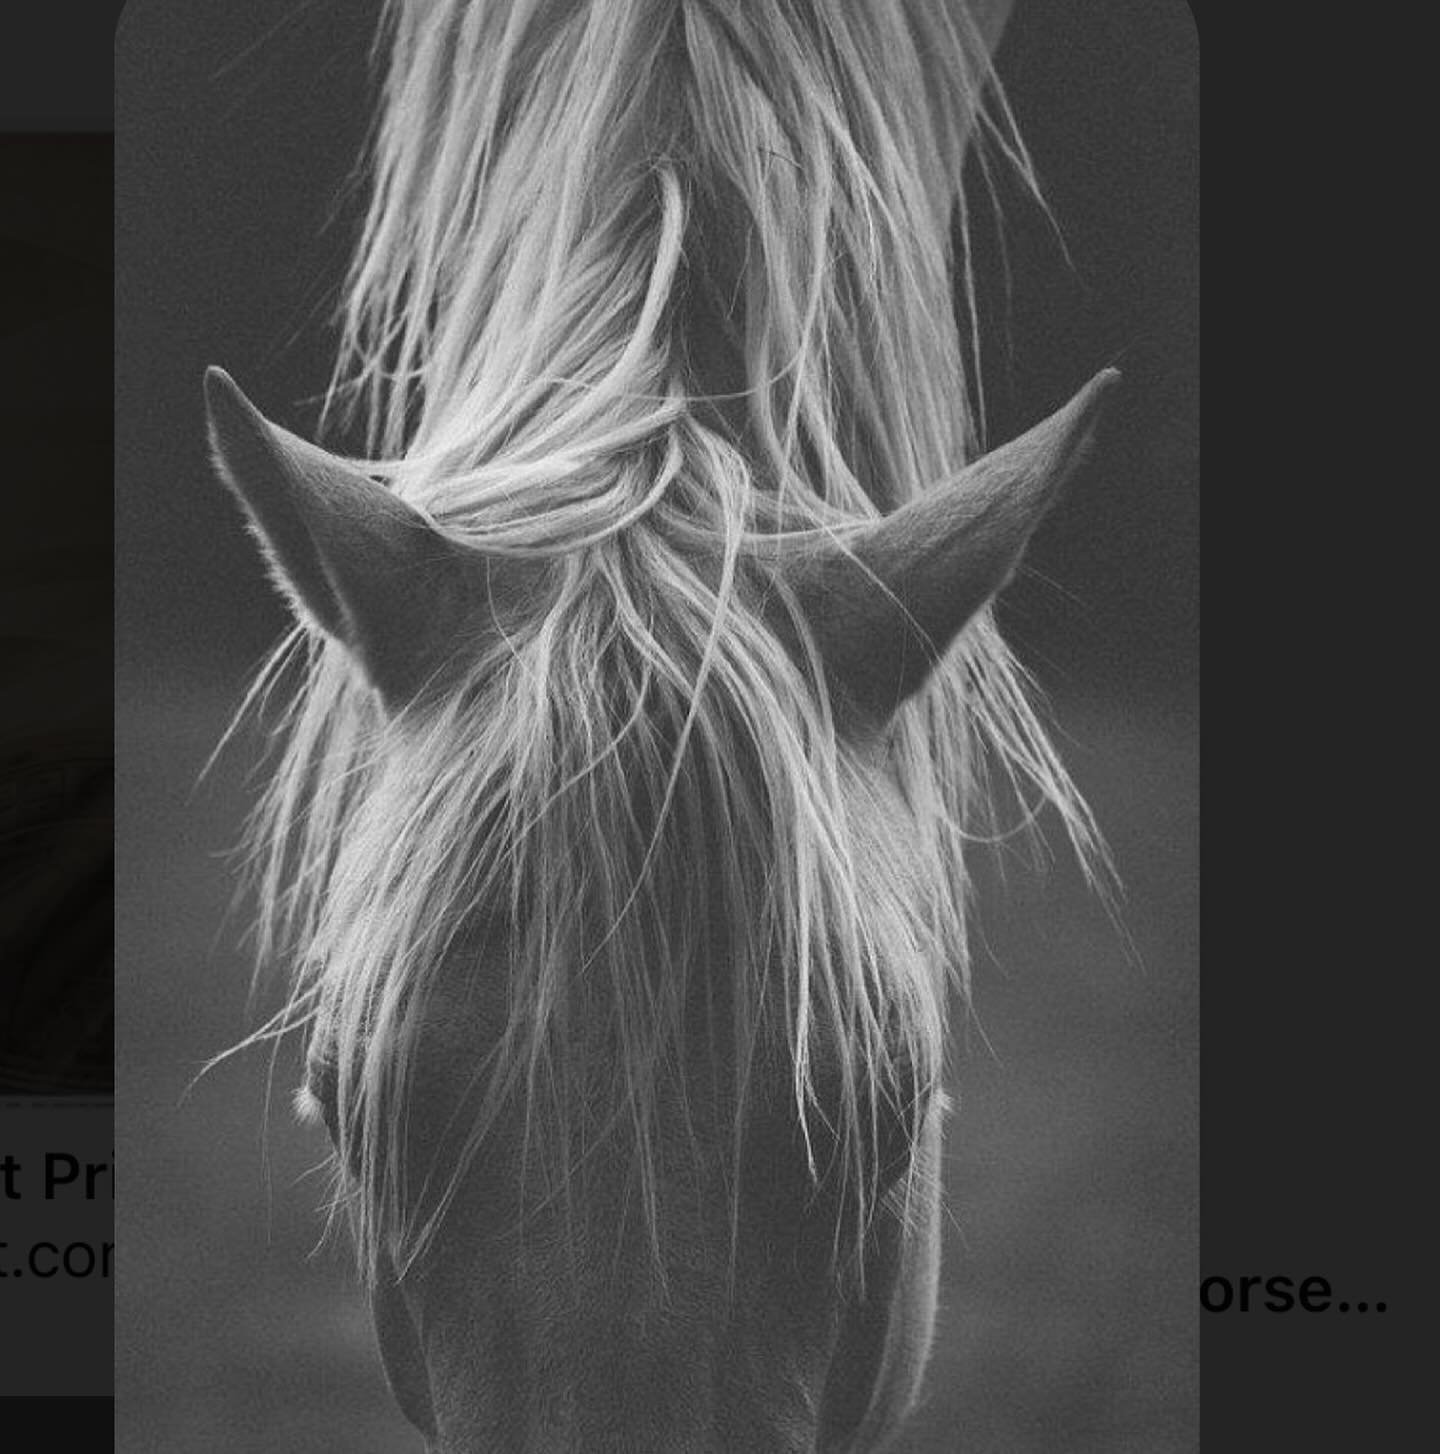 This week&rsquo;s real world inspo&hellip; same same. But different. #horselove #horsemane #texturedhair #blondes #naturalhair #nychair #nychairsalon #nychairstylist #farmlife #citylfe #weekendhair #modeloffduty #hairinspo #inspo #inspiration #haired